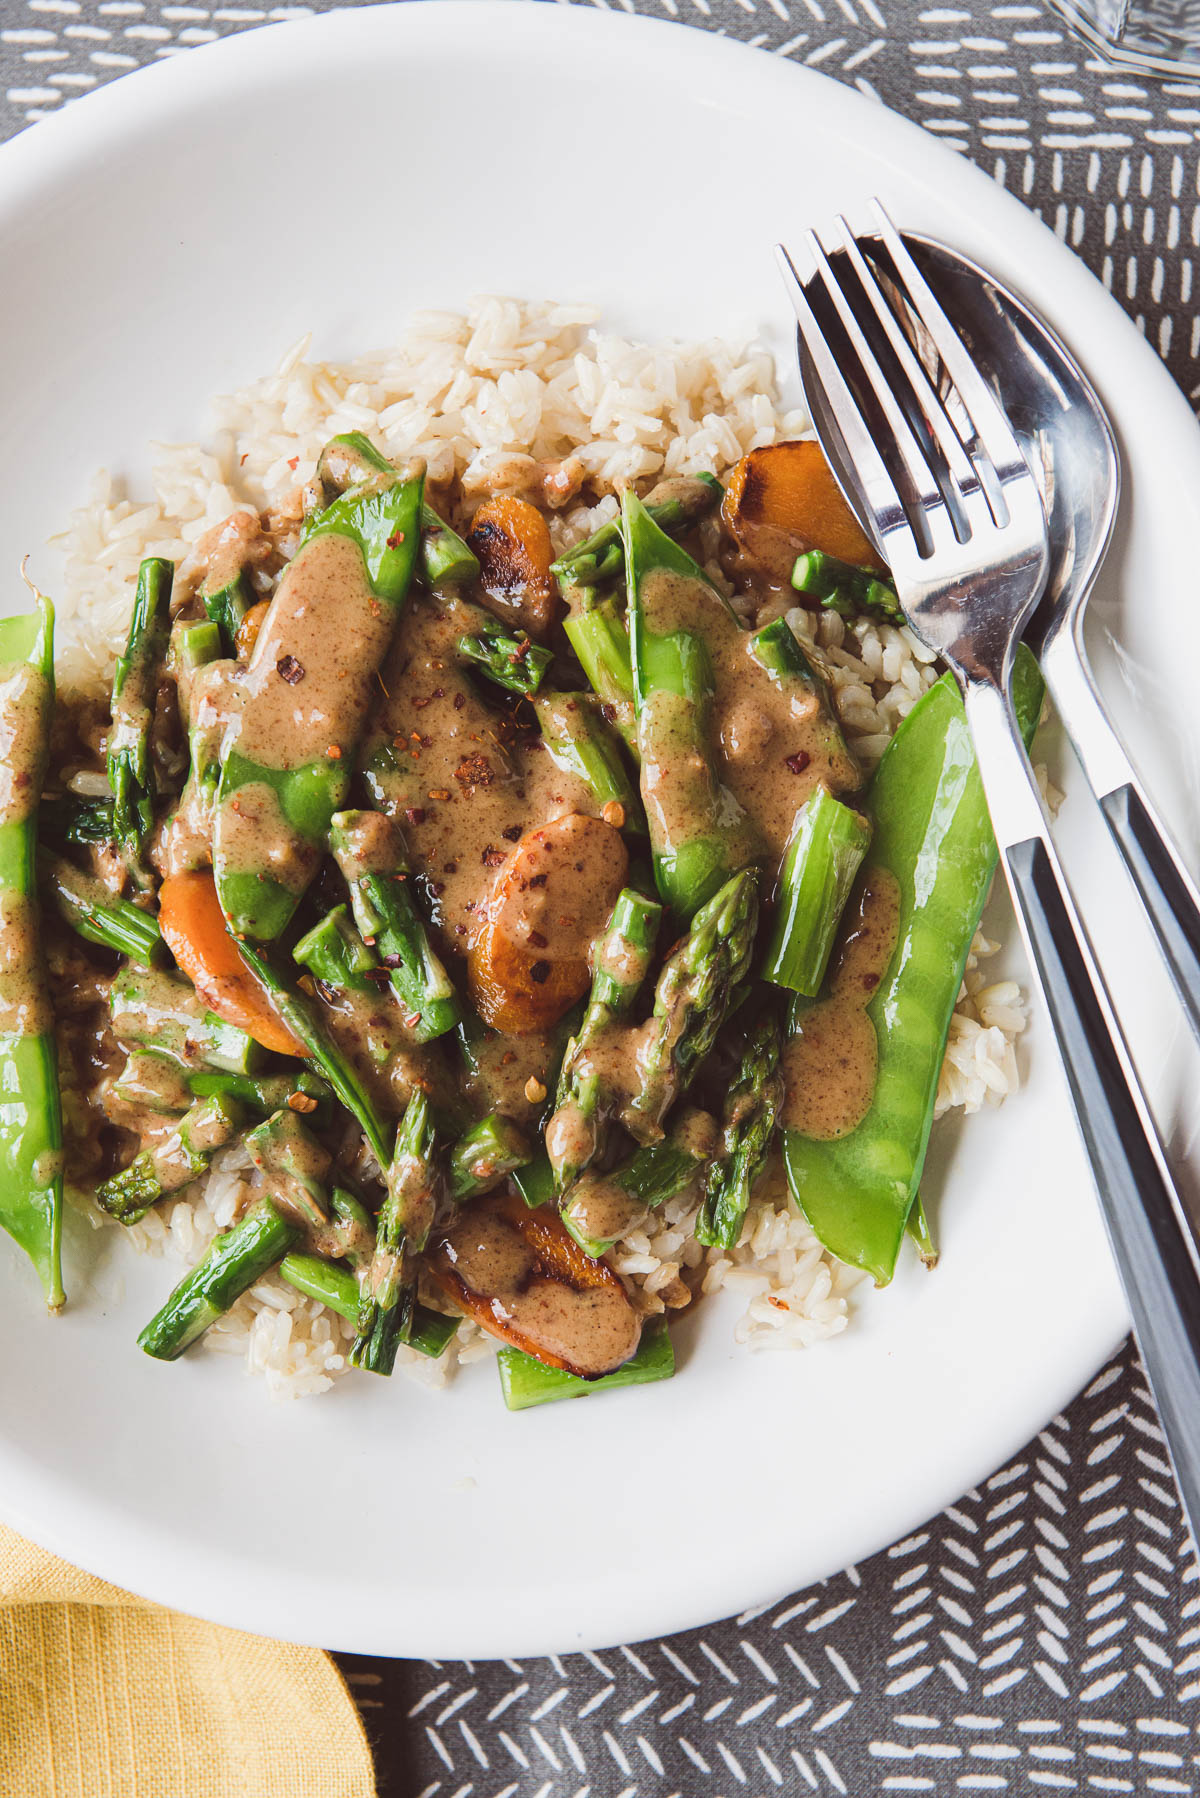 spring vegetable stir-fry covered with almond butter sauce on a bed of brown rice.